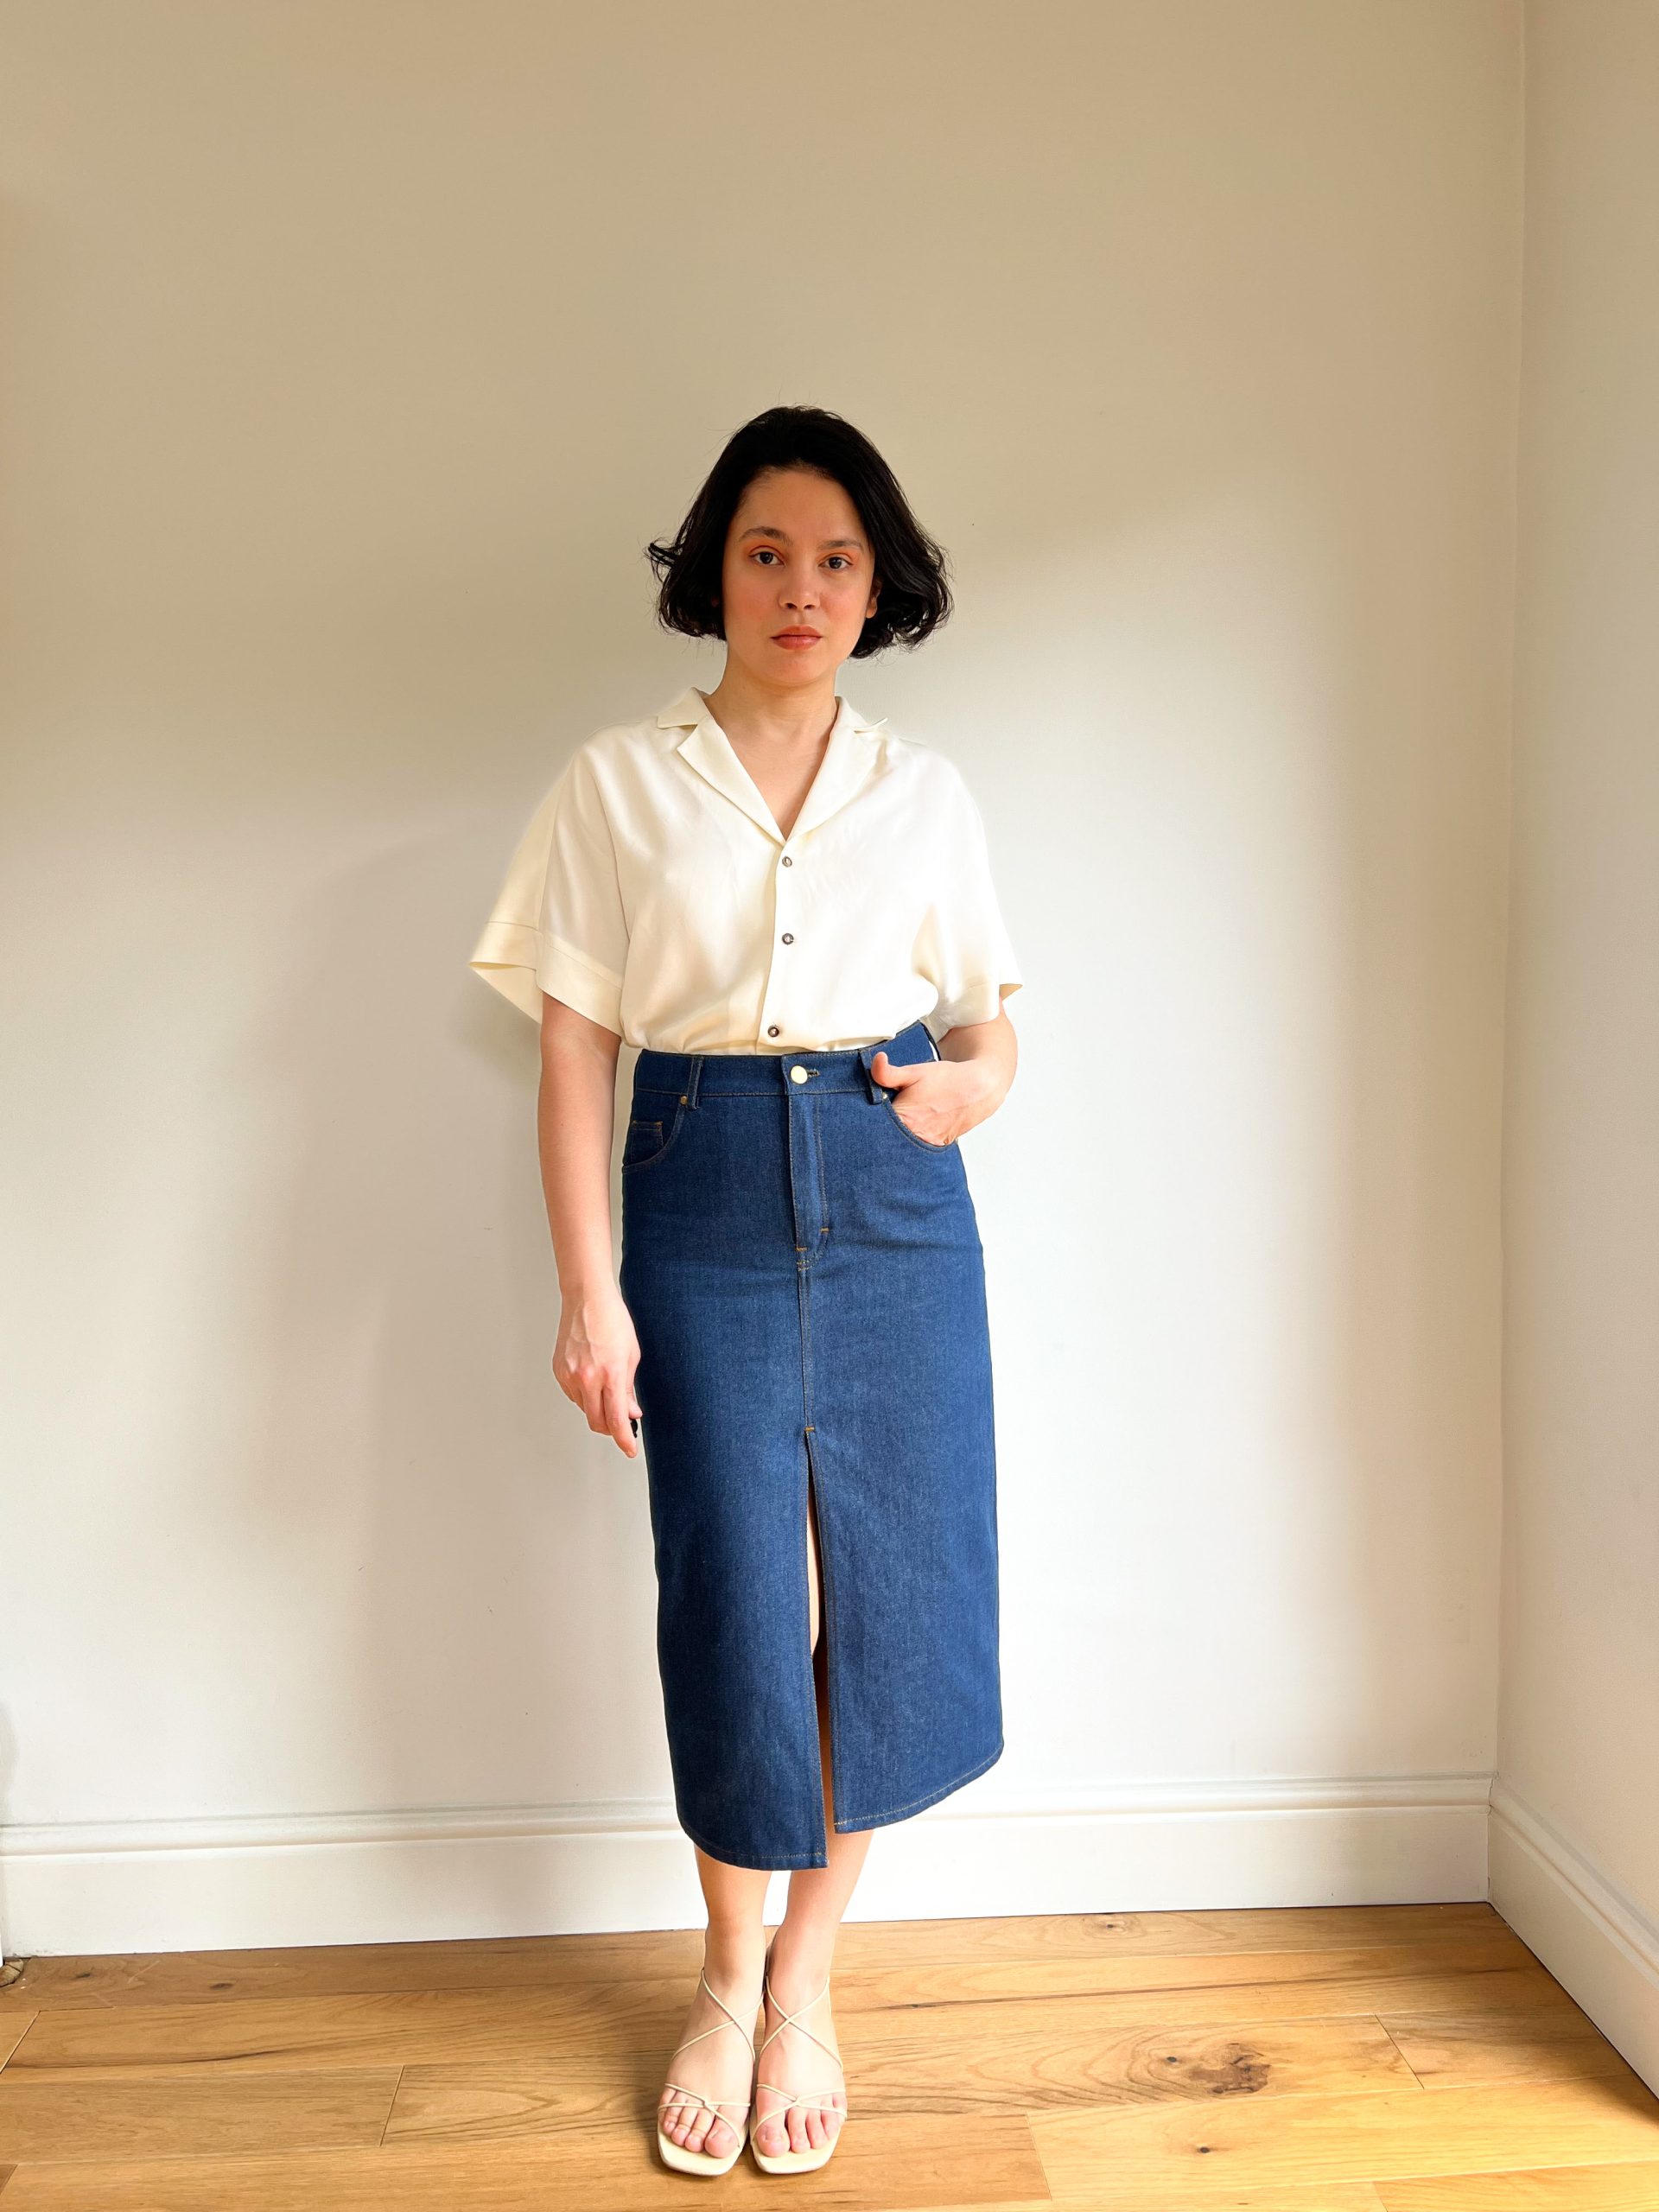 Woman wearing the Anna Skirt sewing pattern from Bella Loves Patterns on The Fold Line. A classic denim skirt pattern made in denim, cotton twill, corduroy, or linen fabric, featuring a fitted straight silhouette, high waist, waistband with belt loops, zi